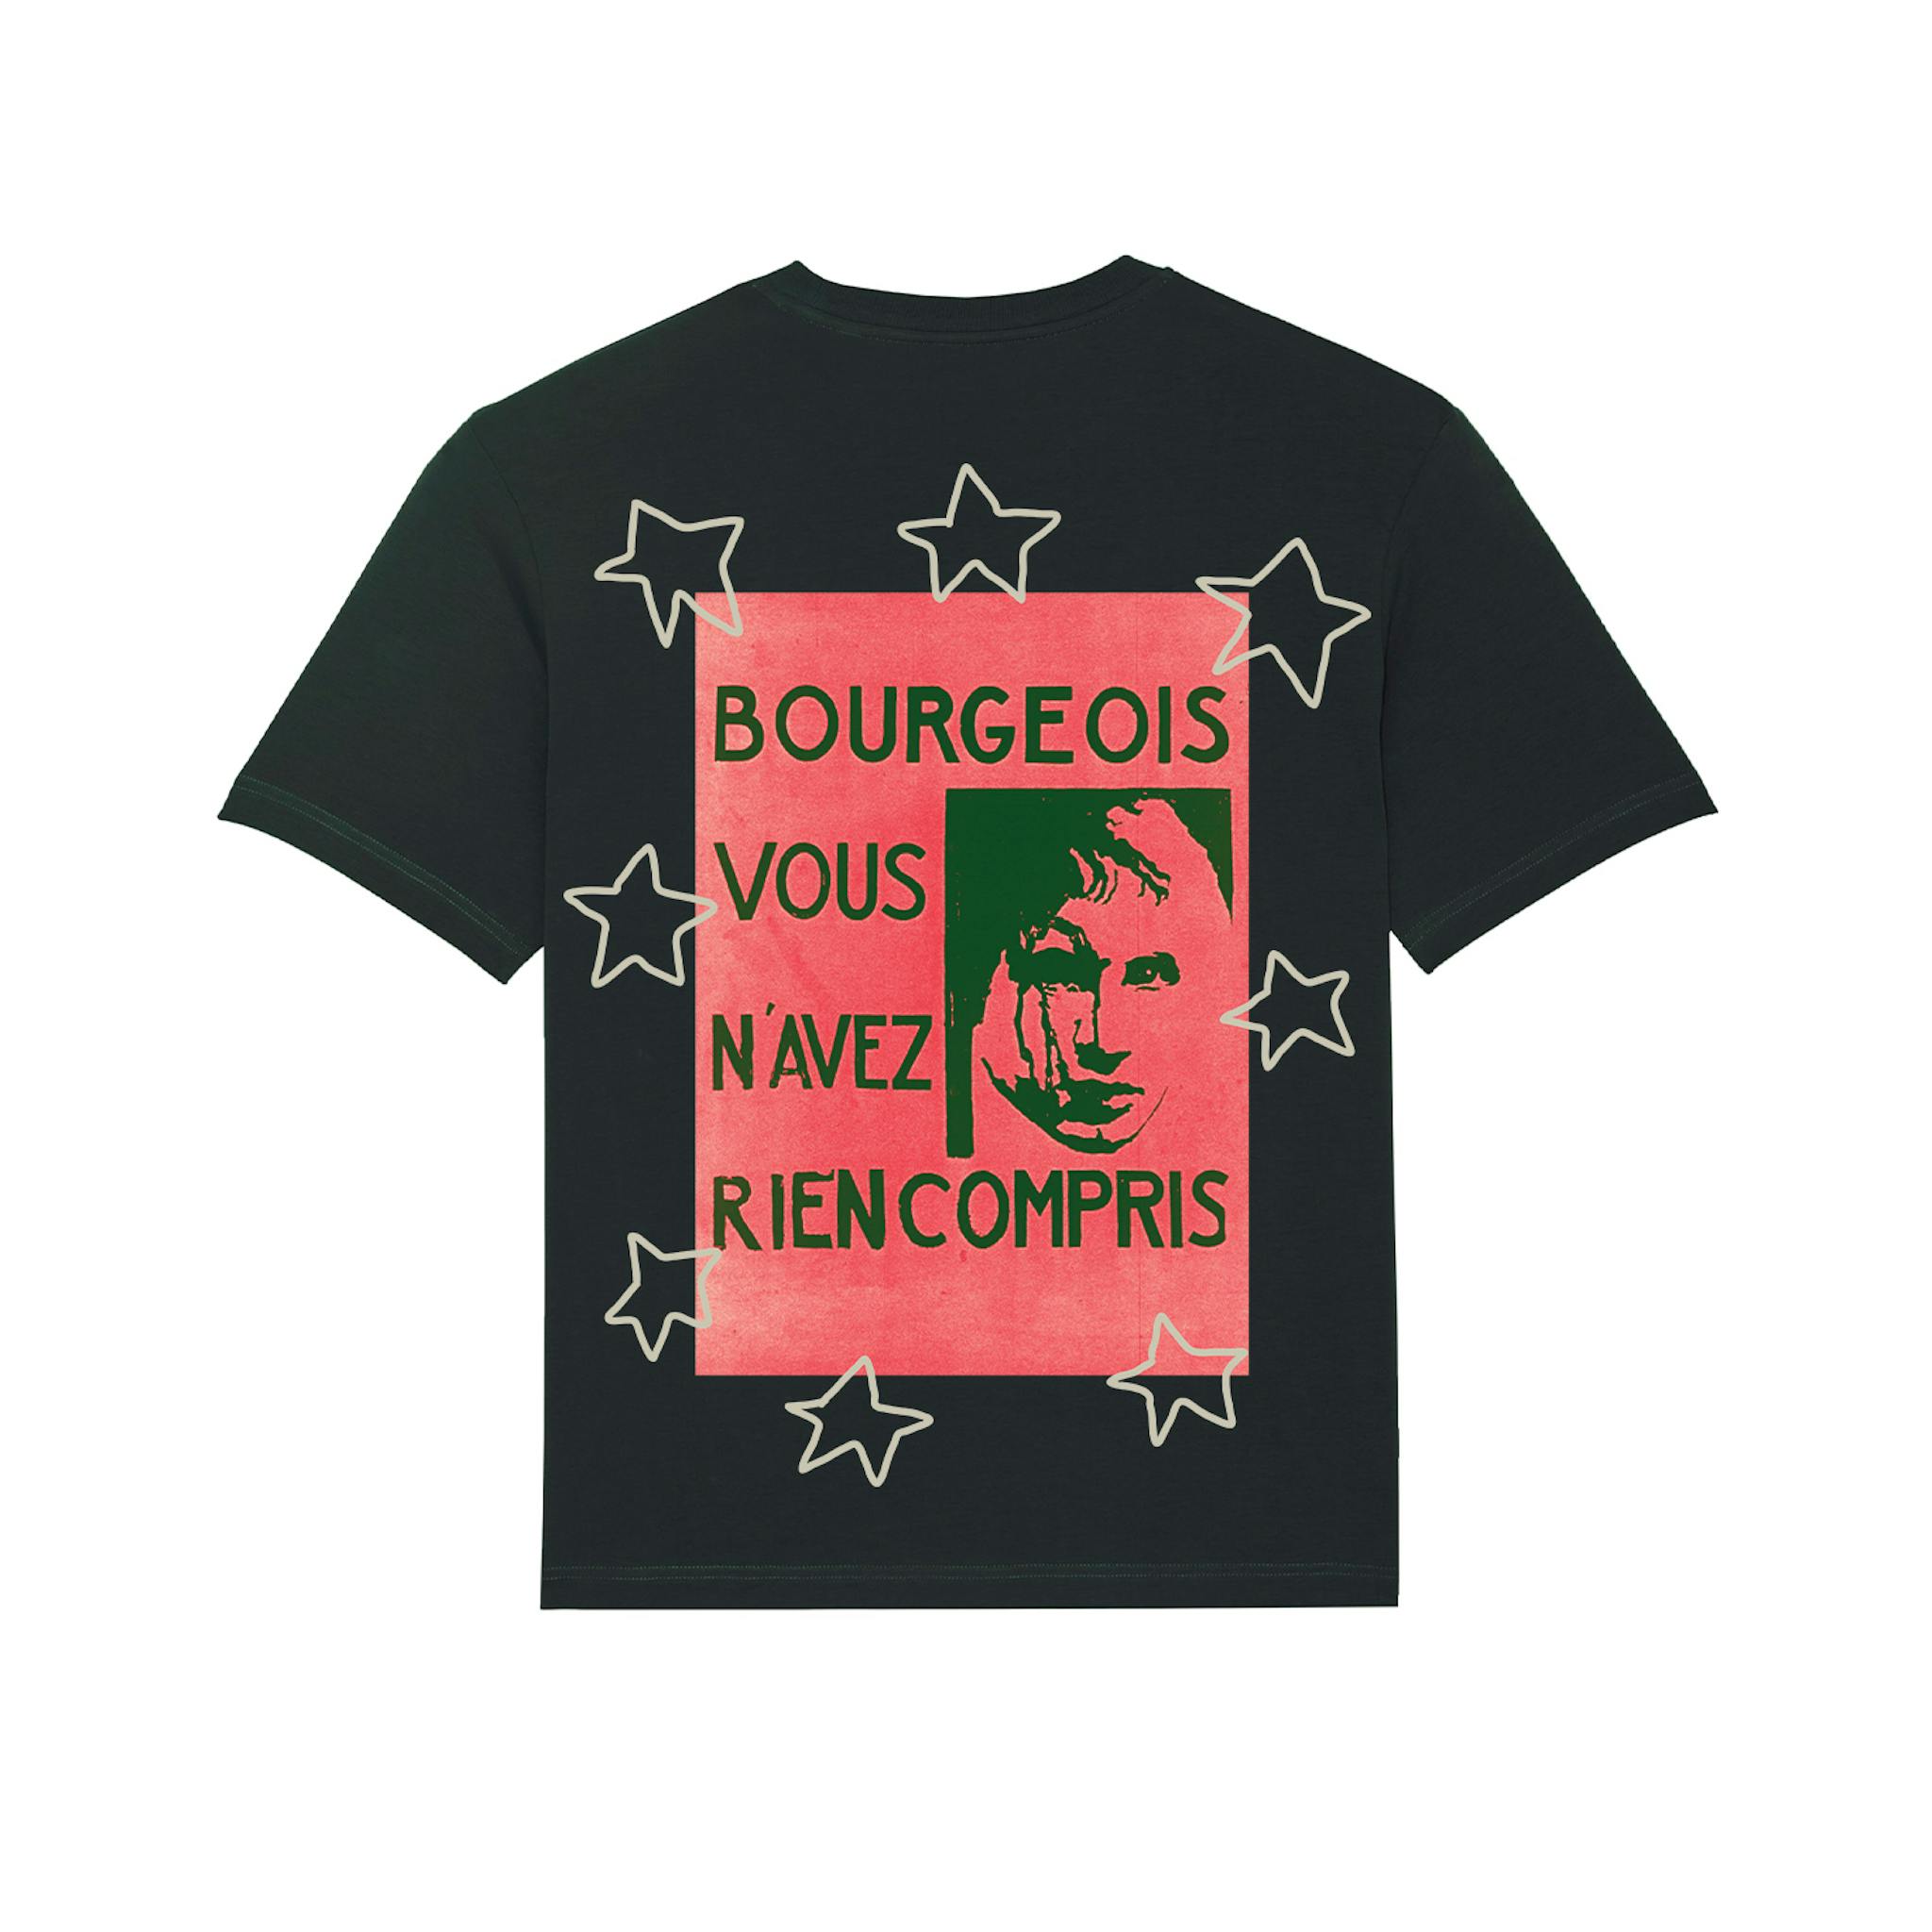 A black short sleeve T-shirt with a large graphic of a beige stars and red and green photograph on the back.